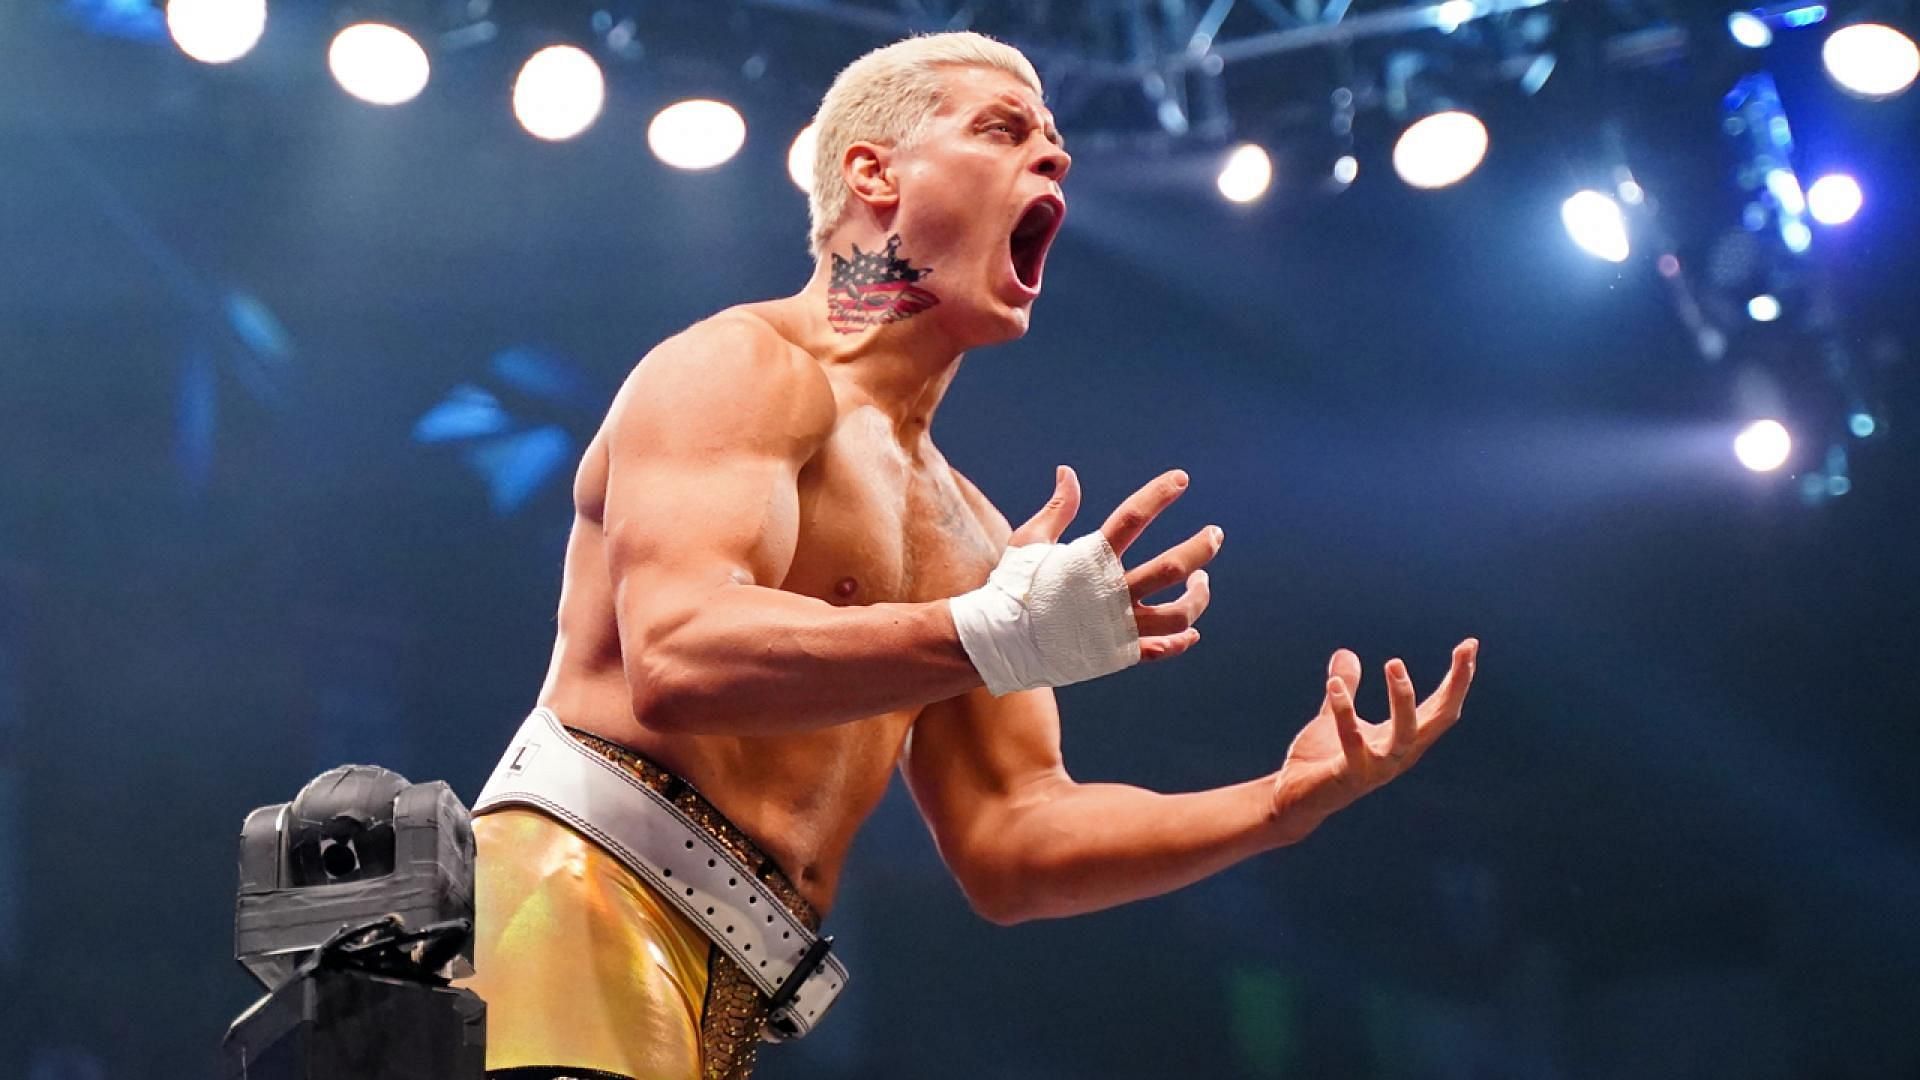 Cody Rhodes could be in line for a shock WWE return